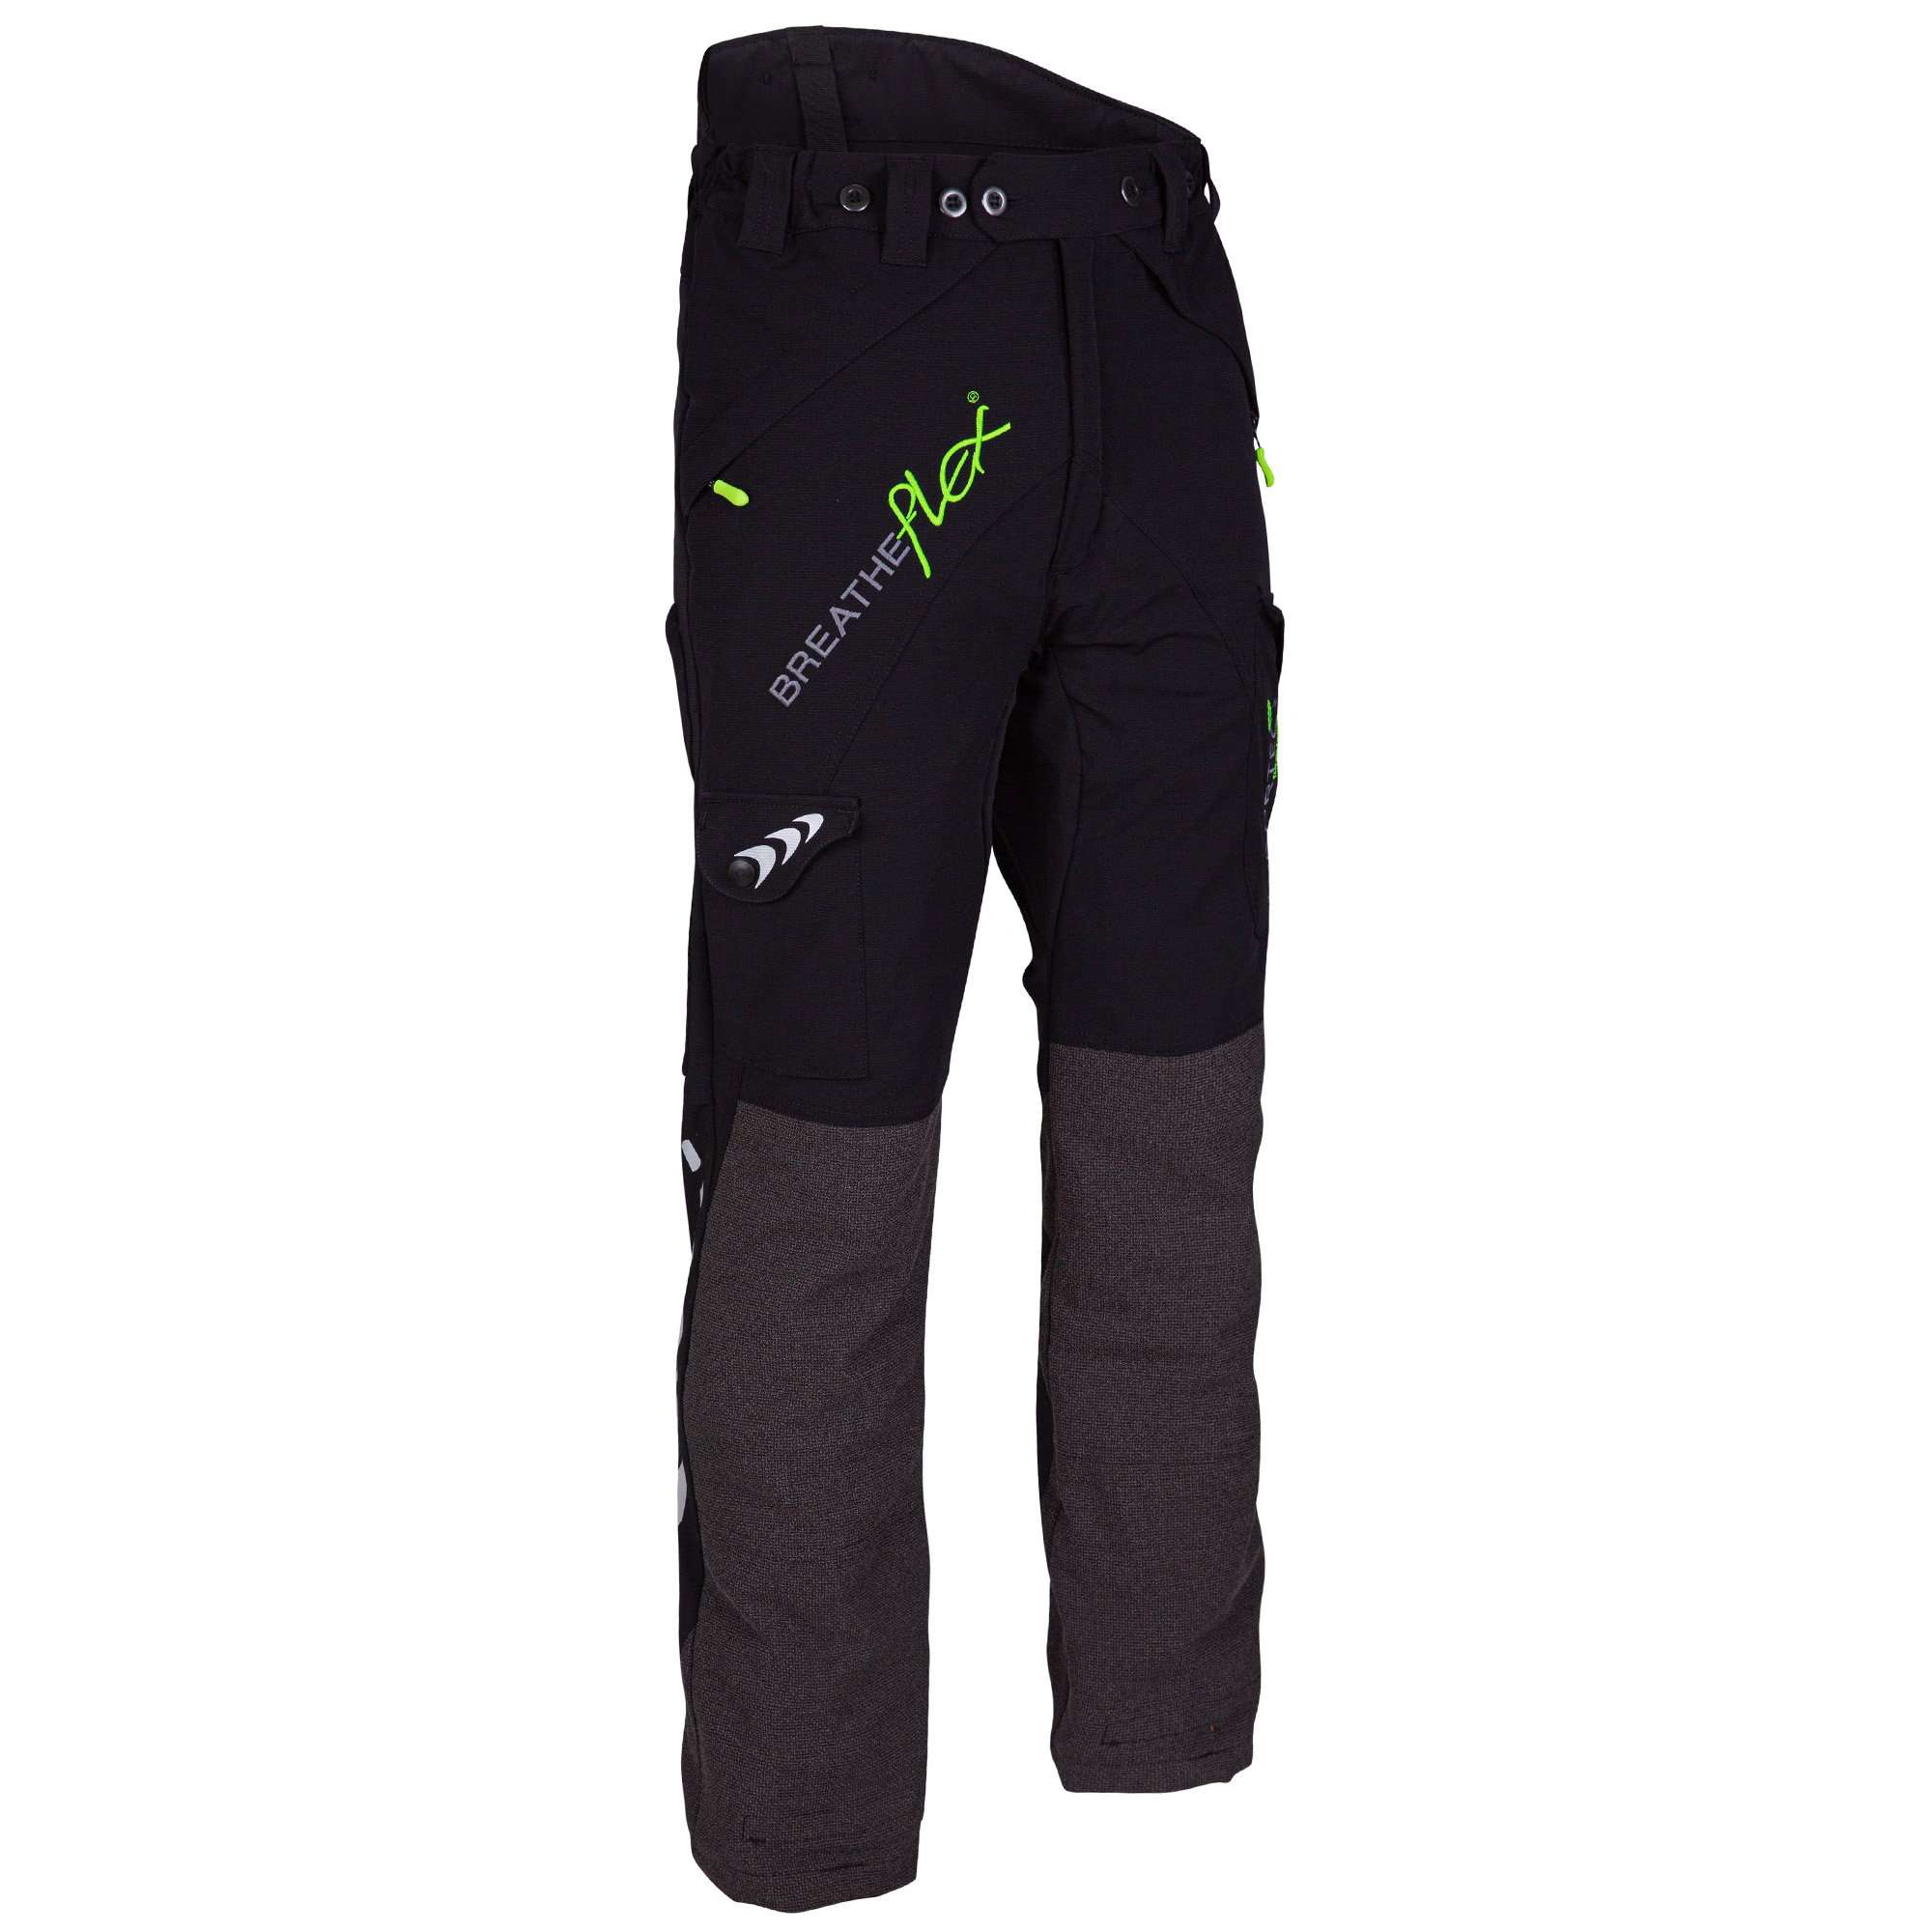 AT4010 Breatheflex Type A Class 1 Chainsaw Trousers - Black - Arbortec Forestwear